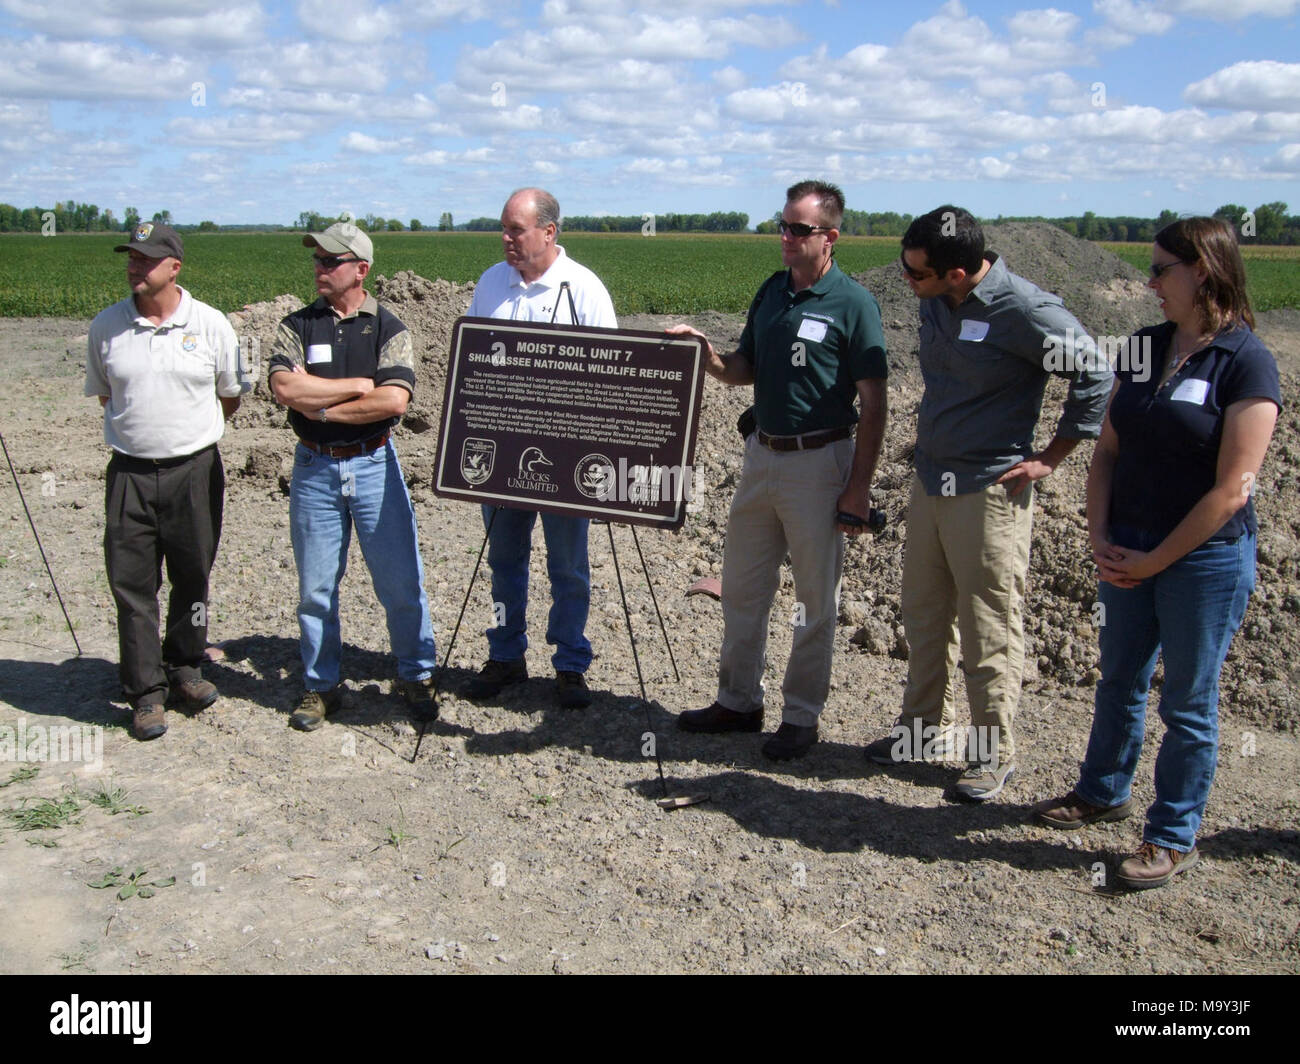 From left to right, Steve Kahl, Russ Terry, Charlie Wooley, Michael Kelly, Chris Adamo, and Barb Avers stand next to a sign to be placed at Shiawassee National Wildlife Refuge Moist Soil Unit 7, once finished. Stock Photo